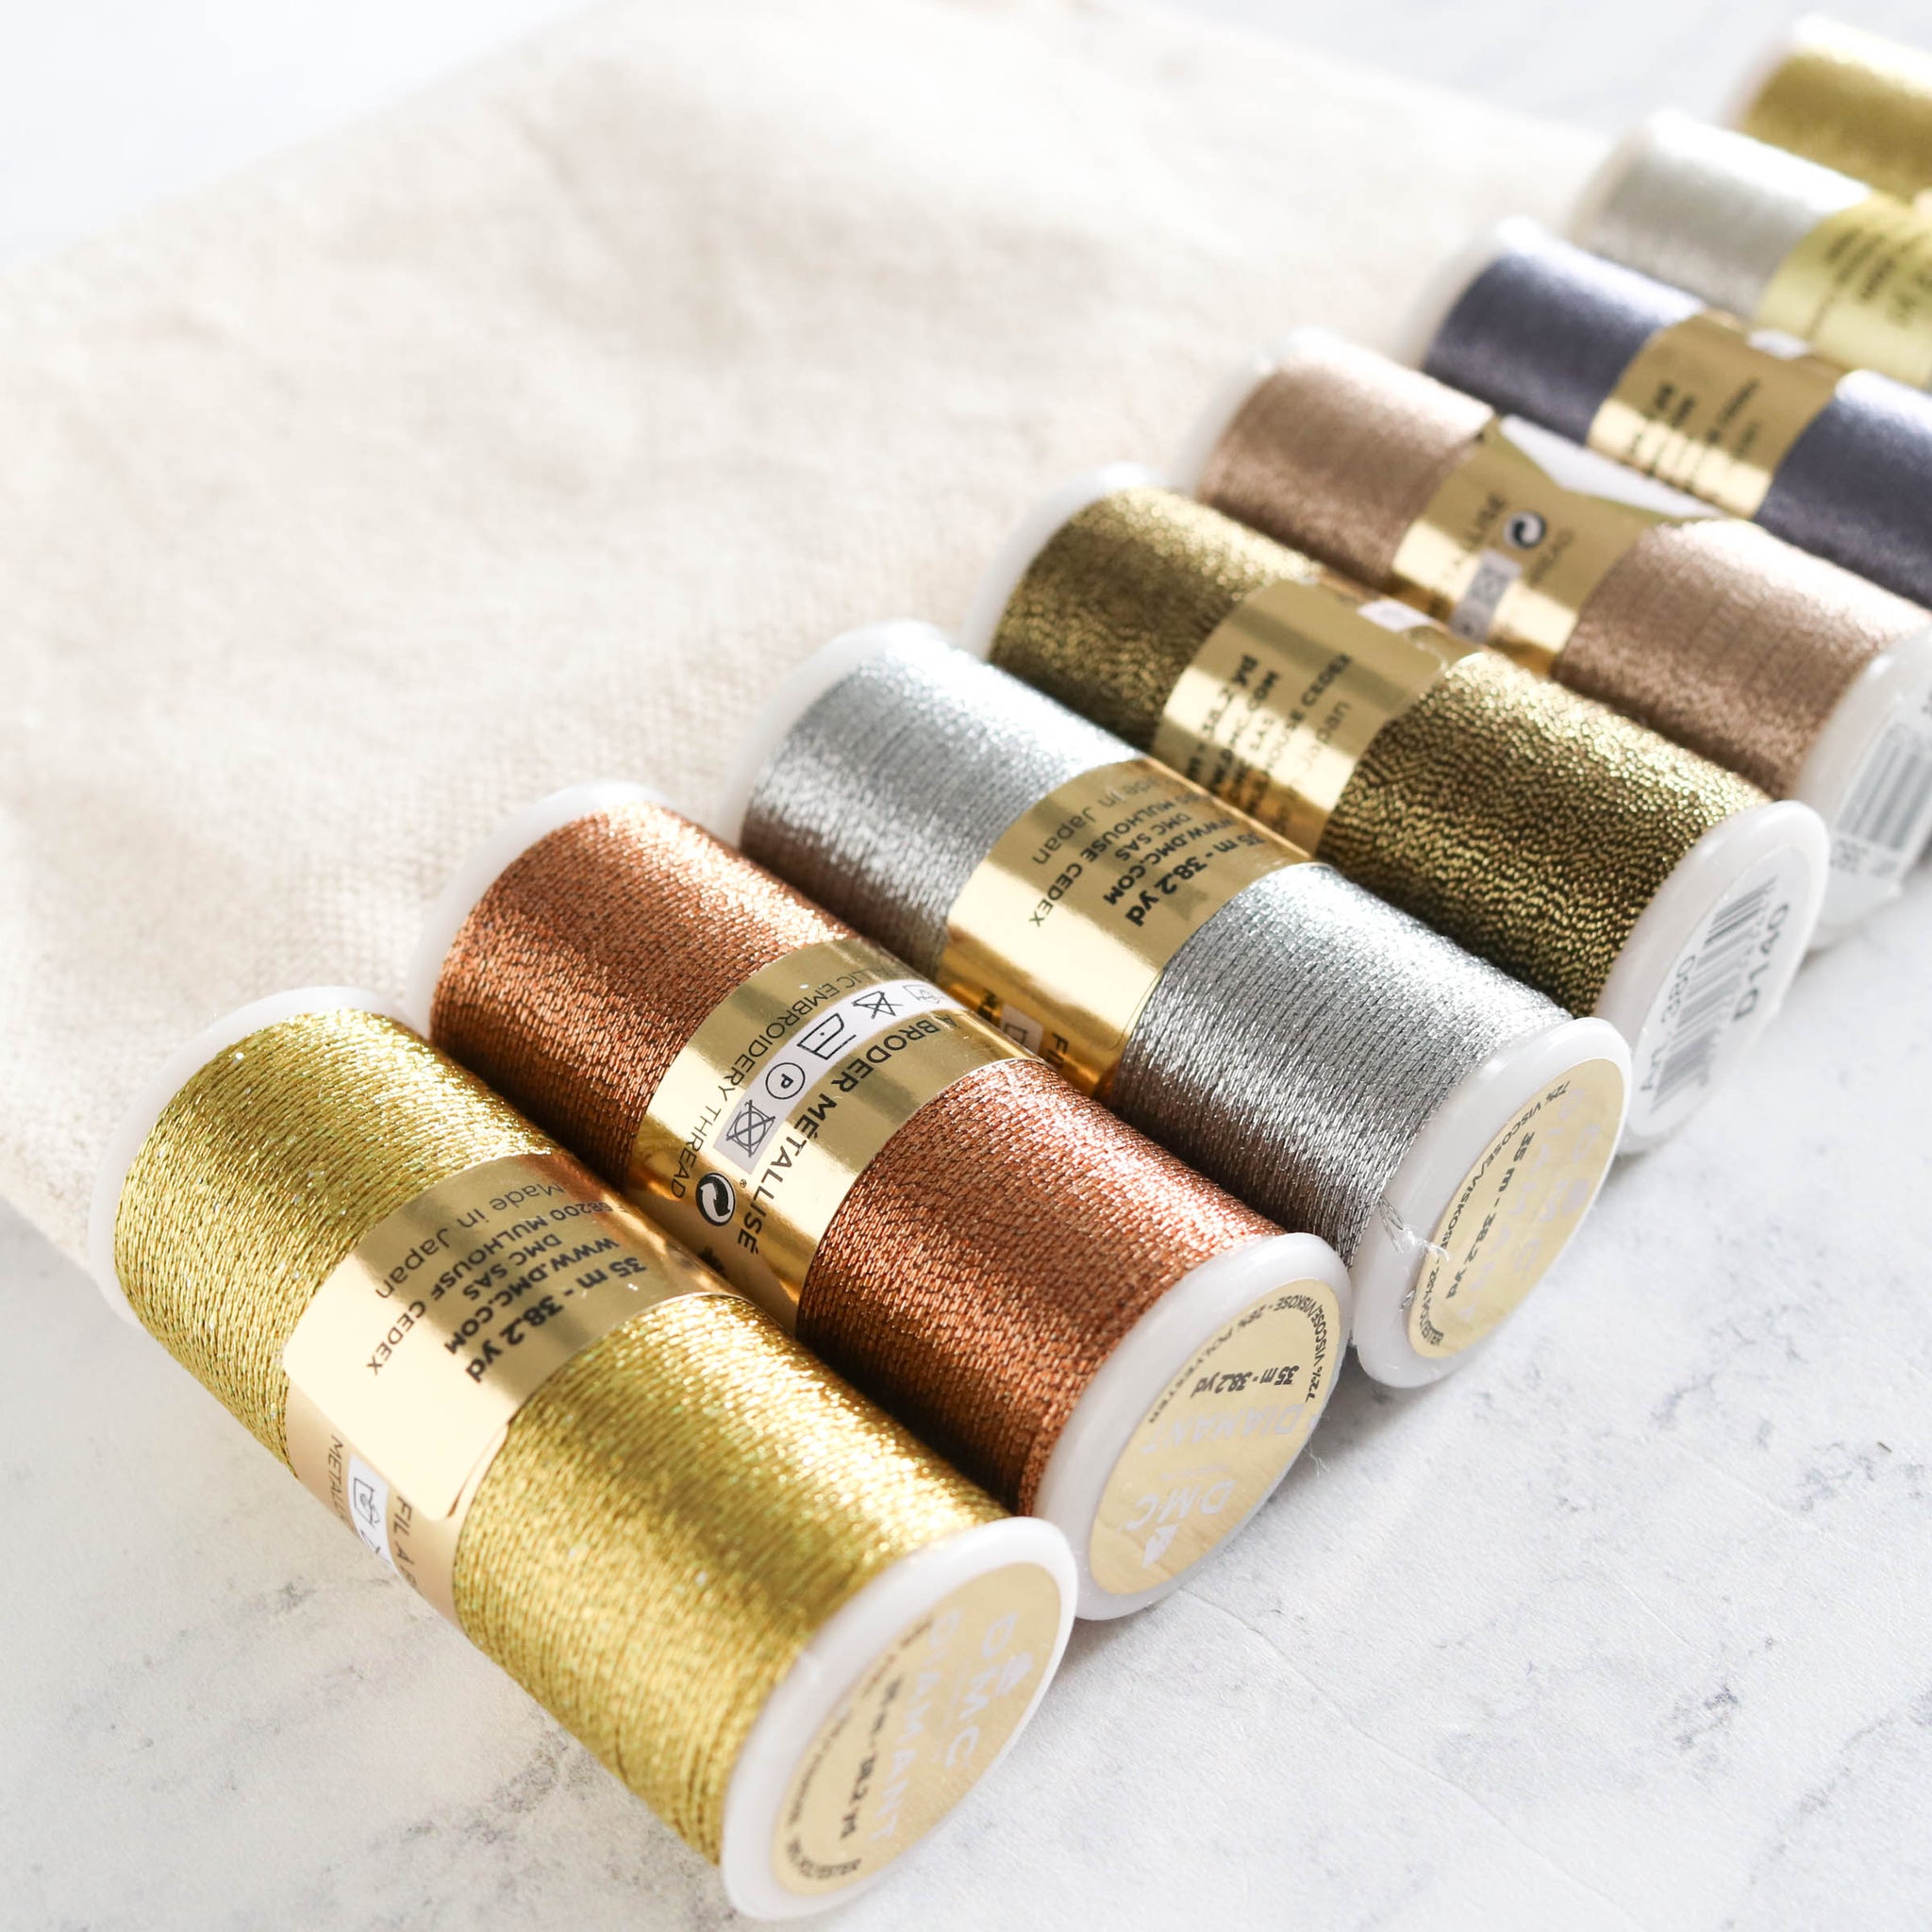 Gold metals and threads - Hand Embroidery supplies shipped